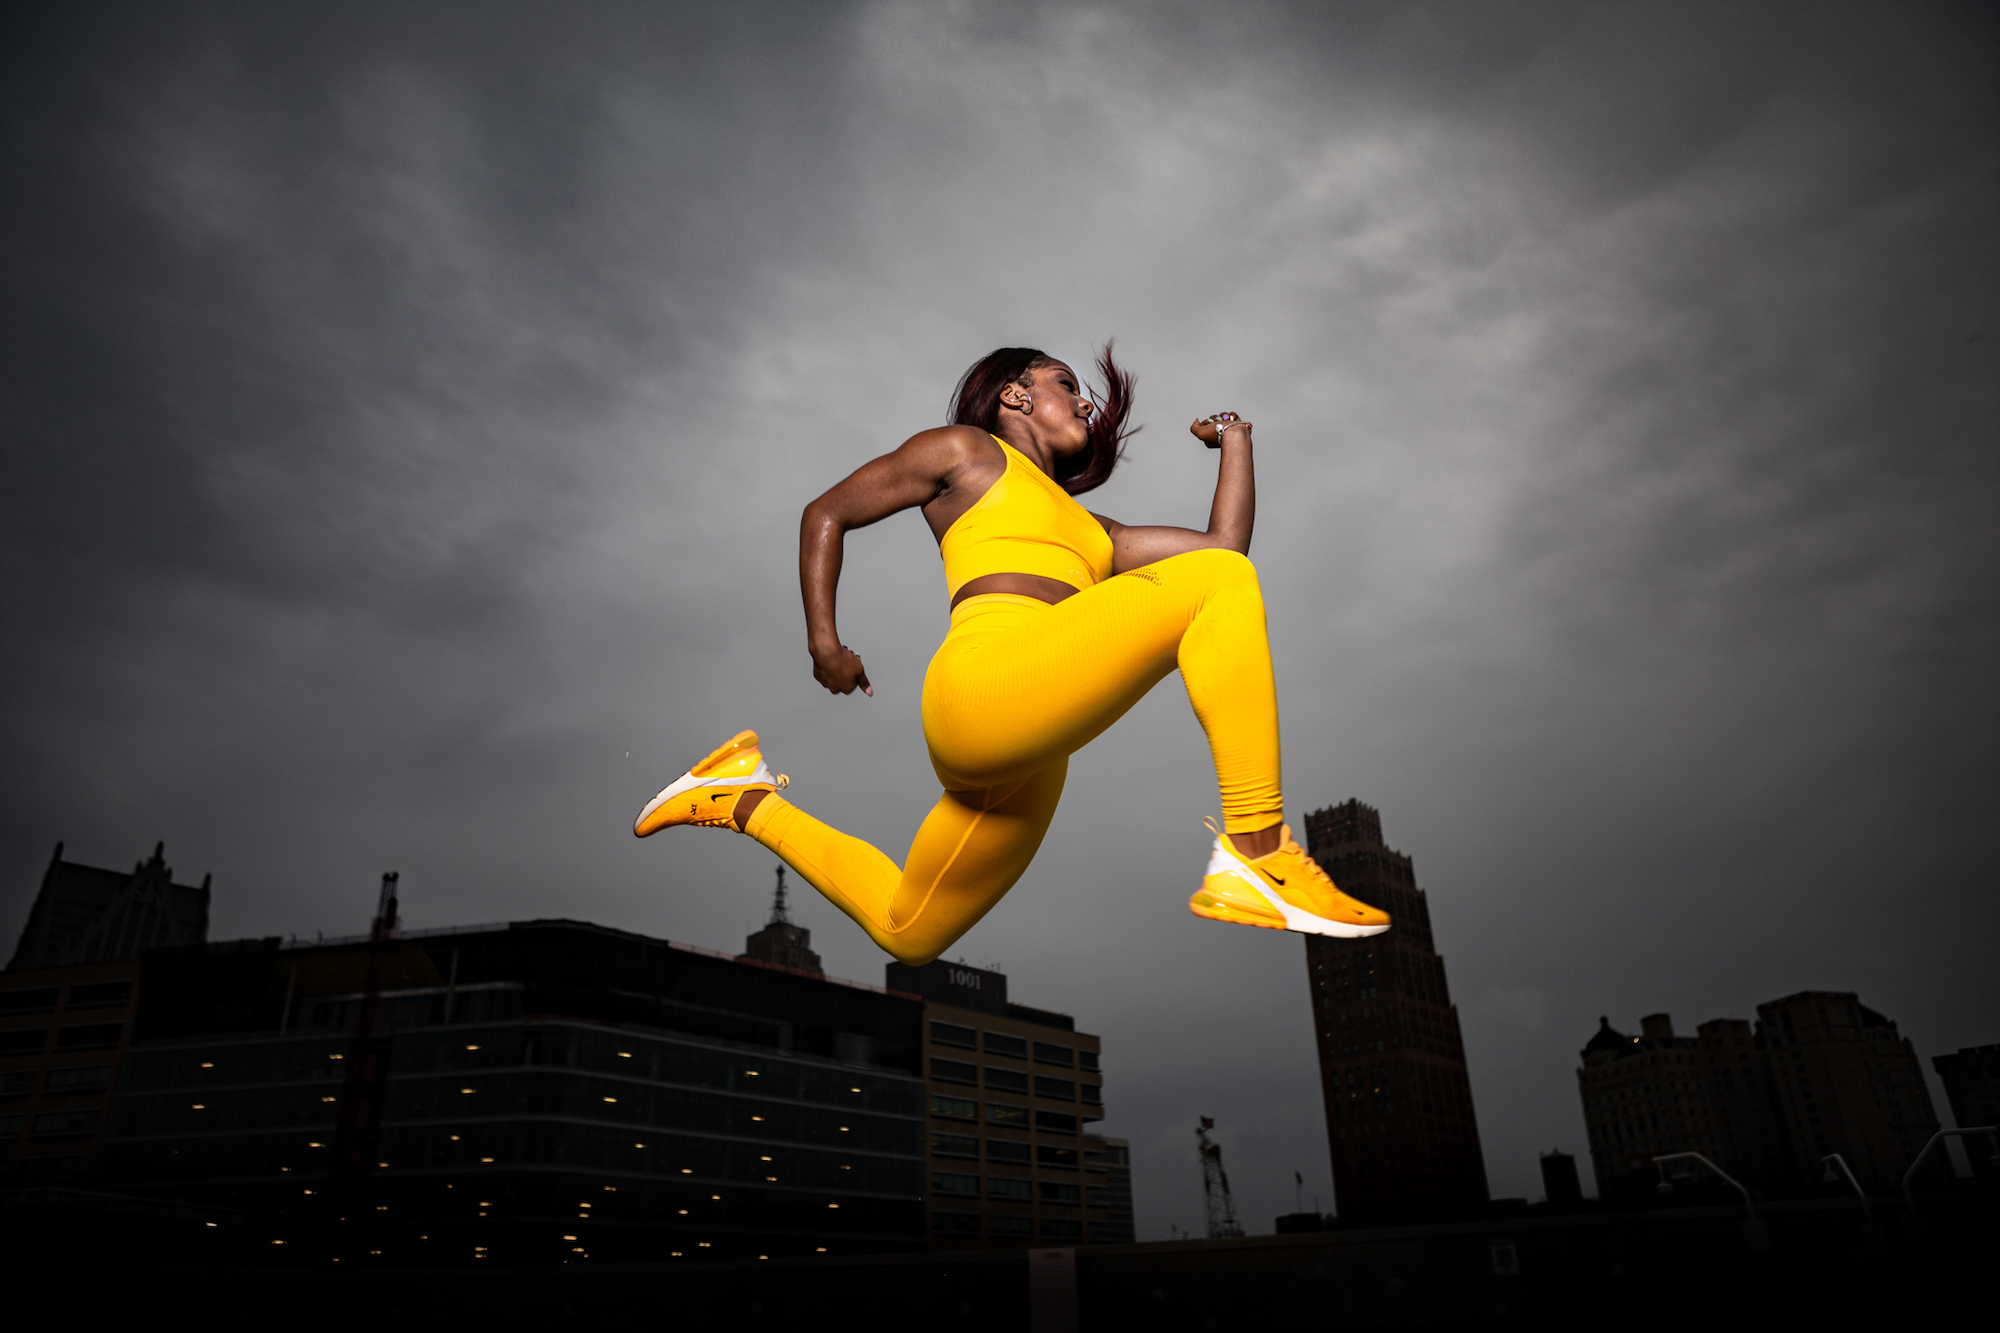 Young woman jumping in yellow suit under a dark sky